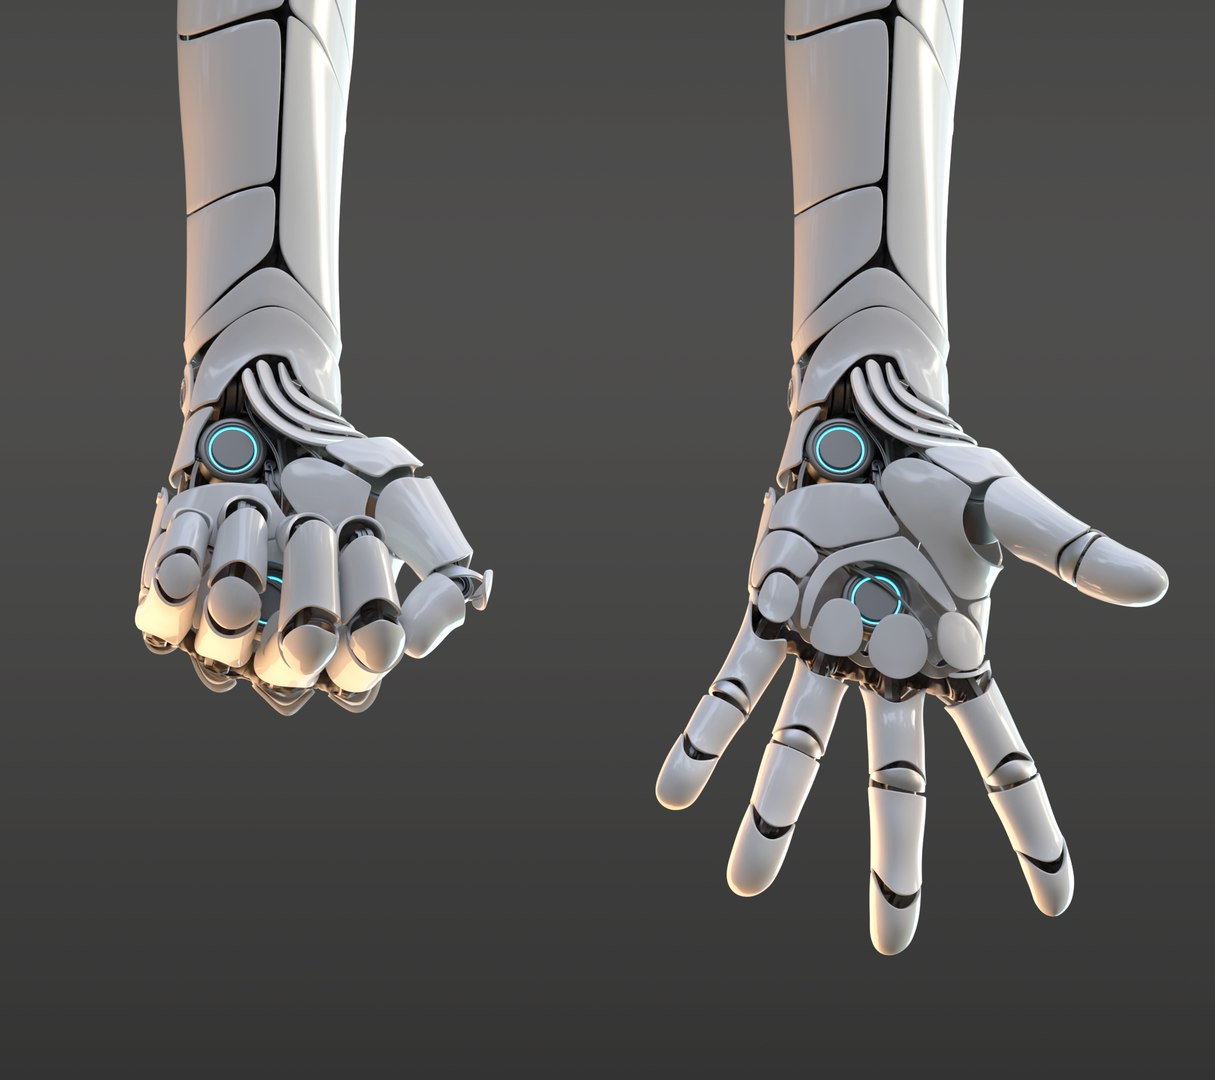 robot hand in zbrush